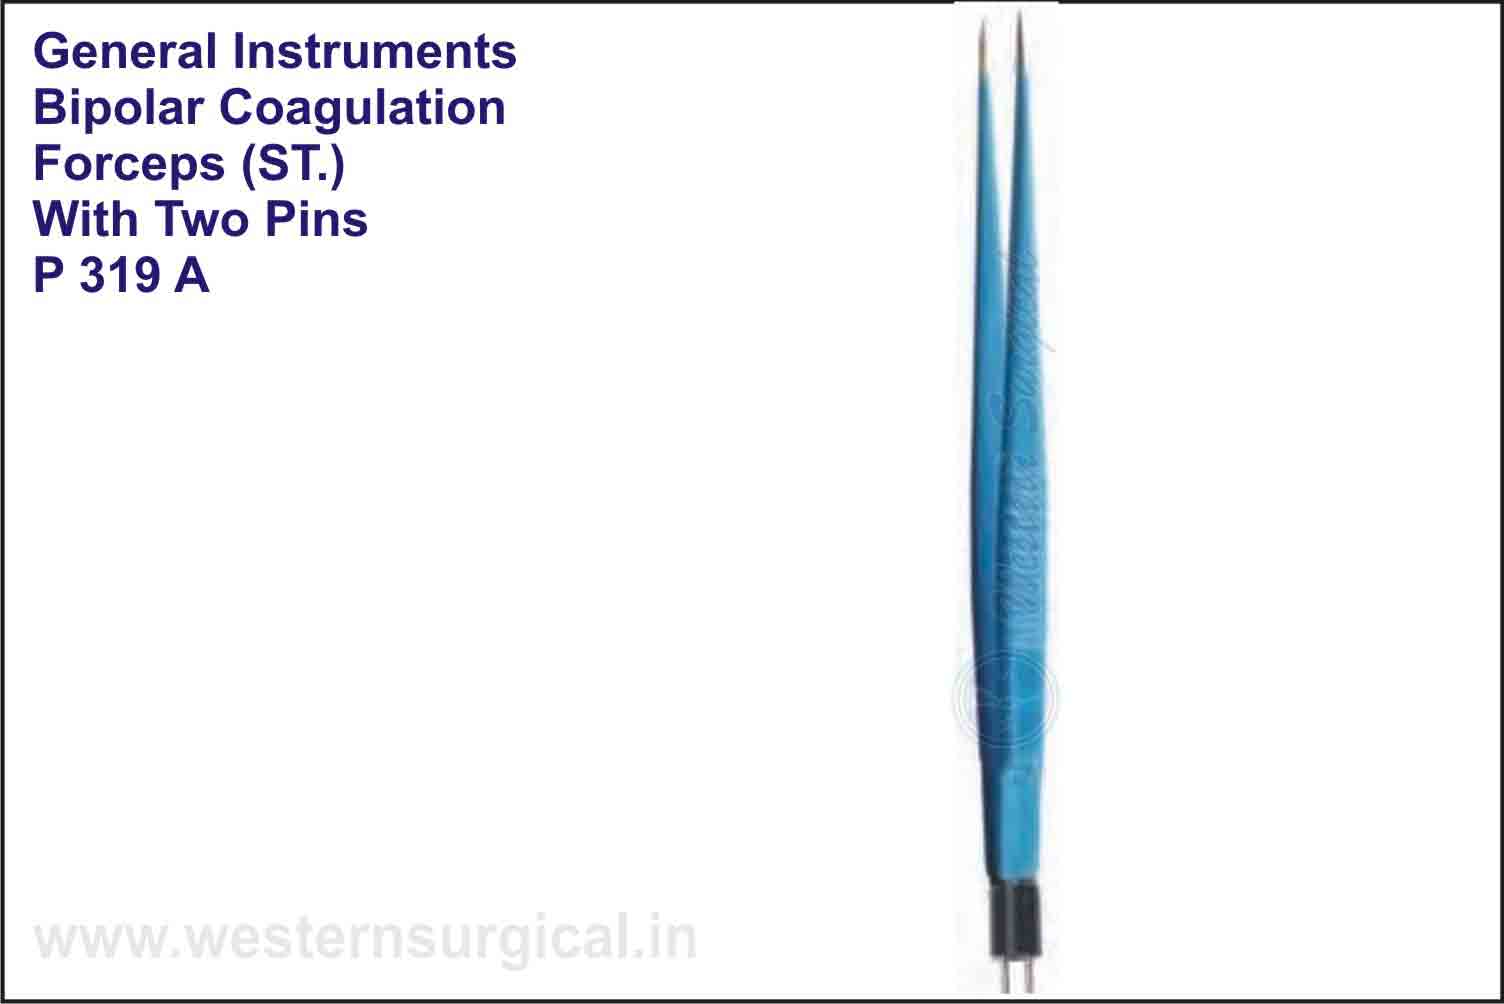 BIPOLAR COAGULATION FORCEPS(ST.) WITH TWO PINS